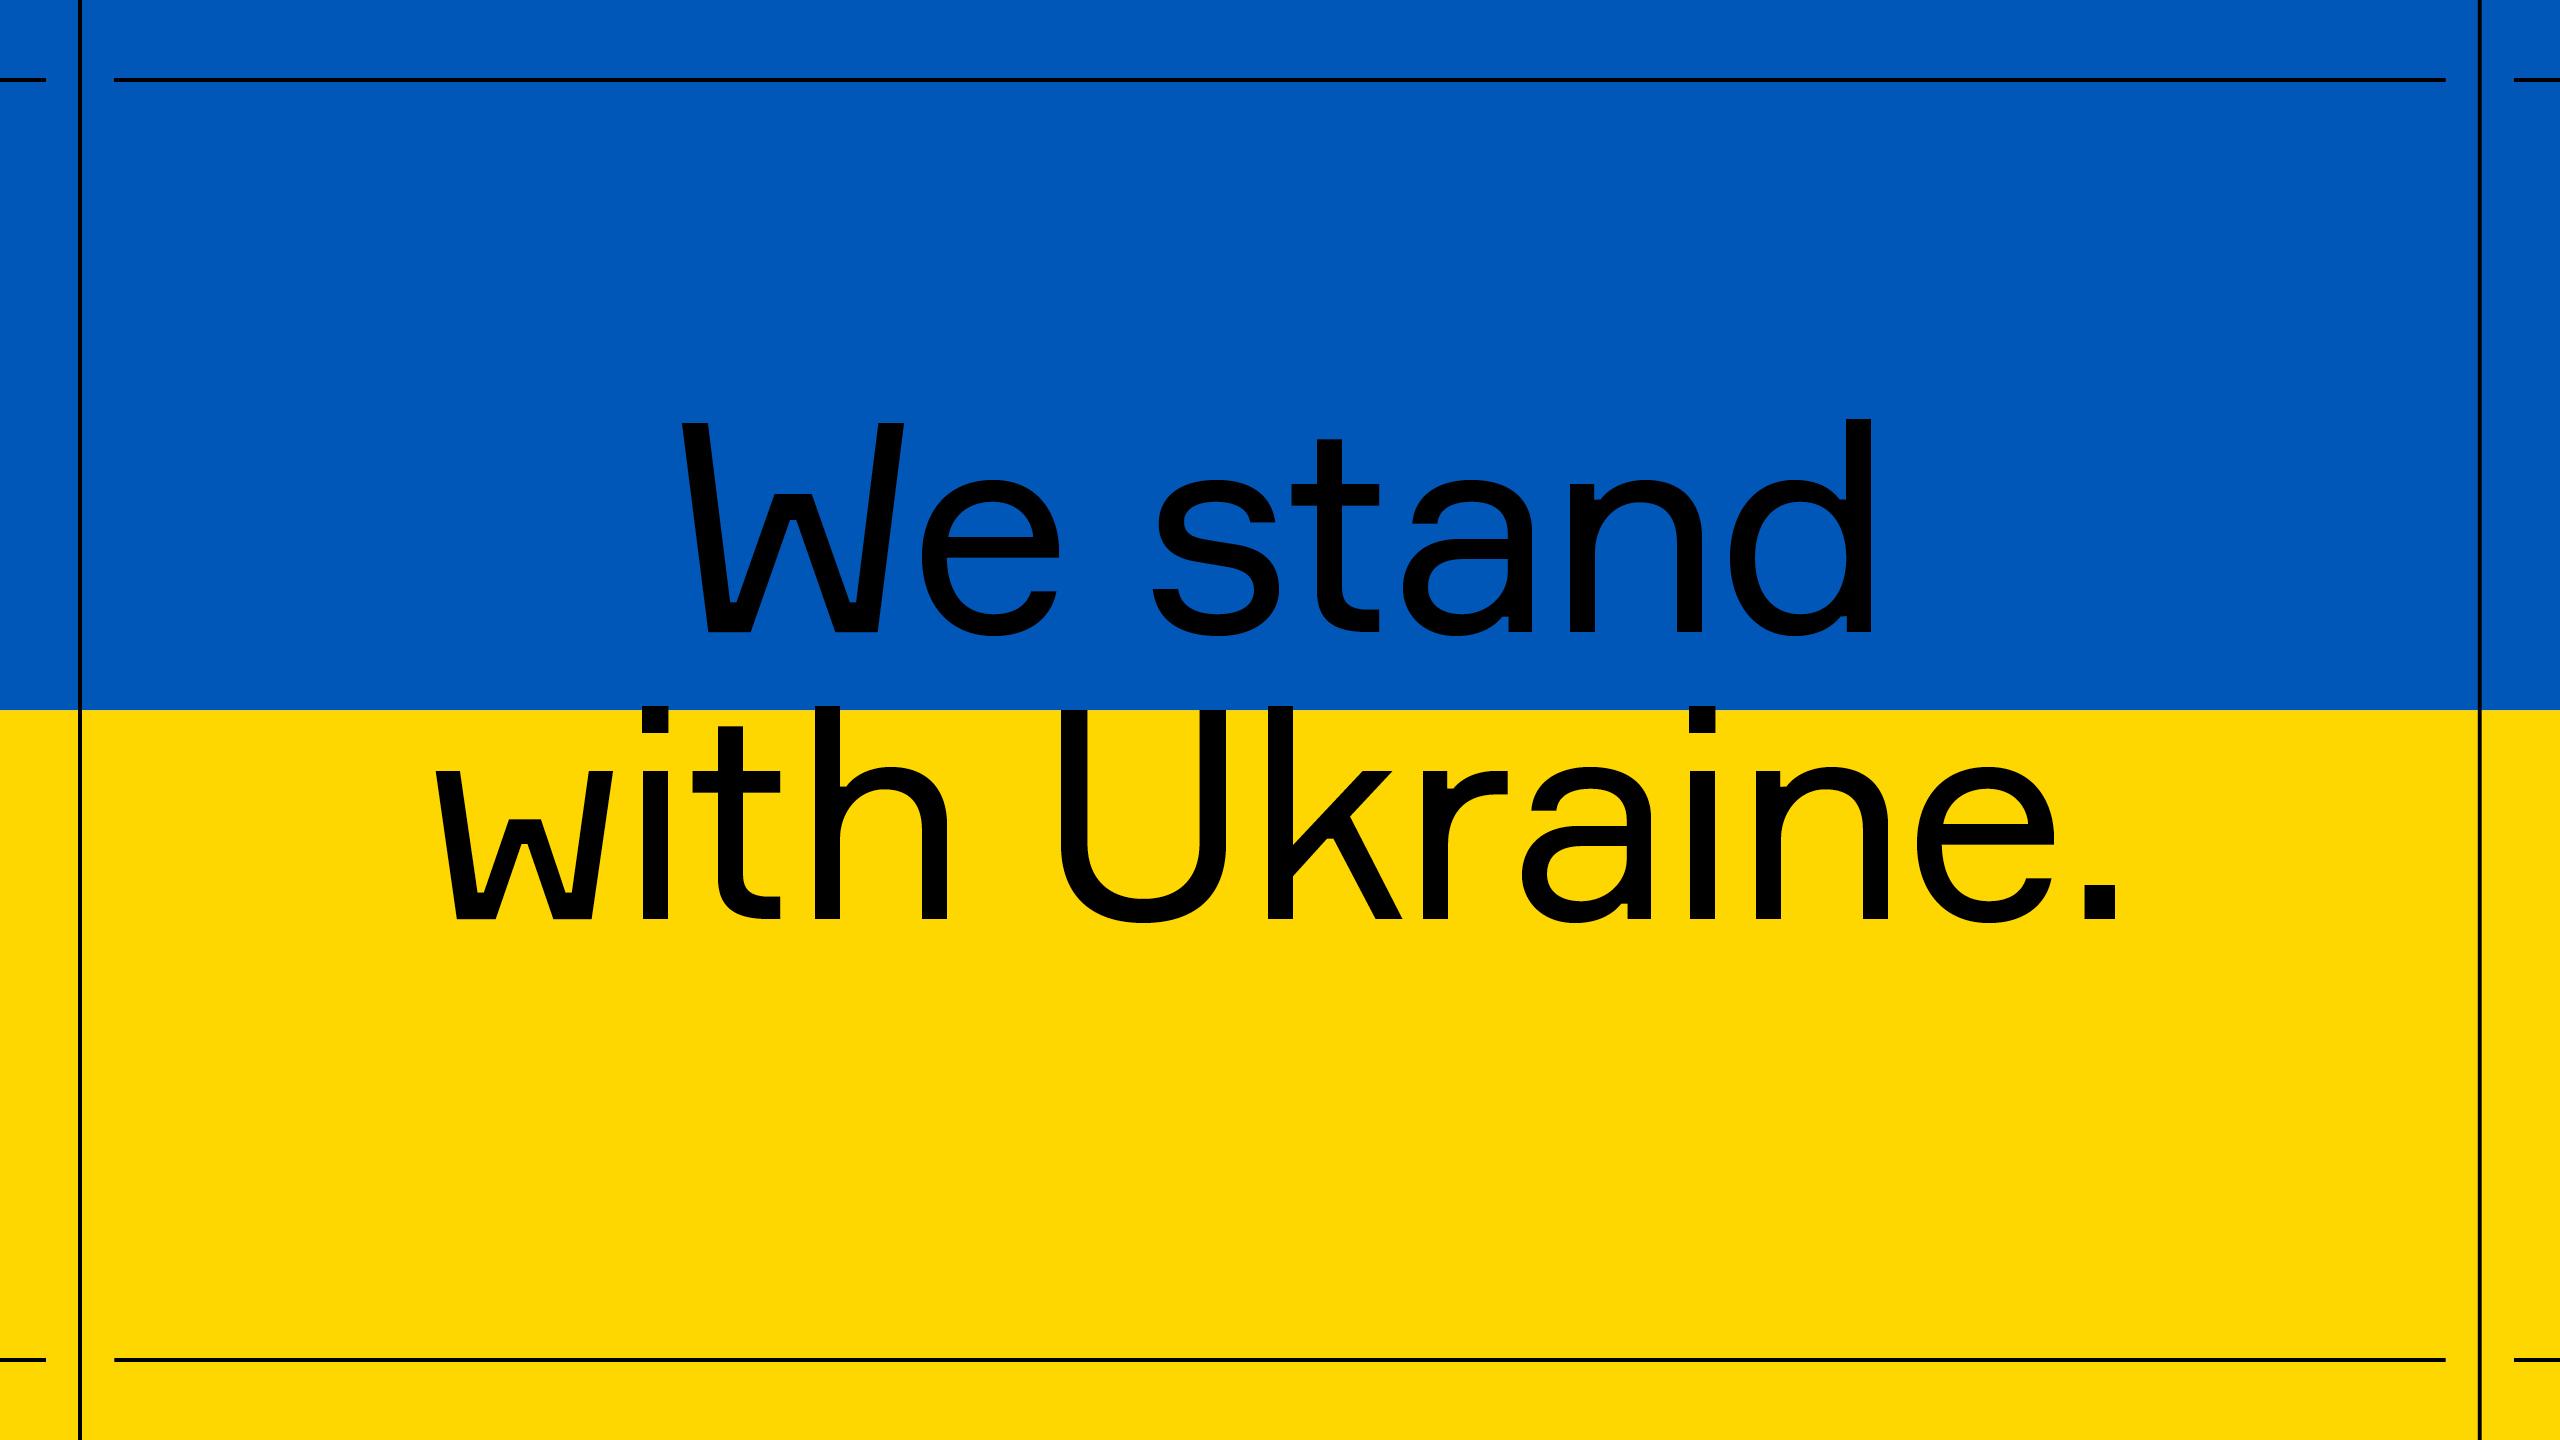 Ukrainian flag colours, blue and yellow, with the text 'We stand with Ukraine'